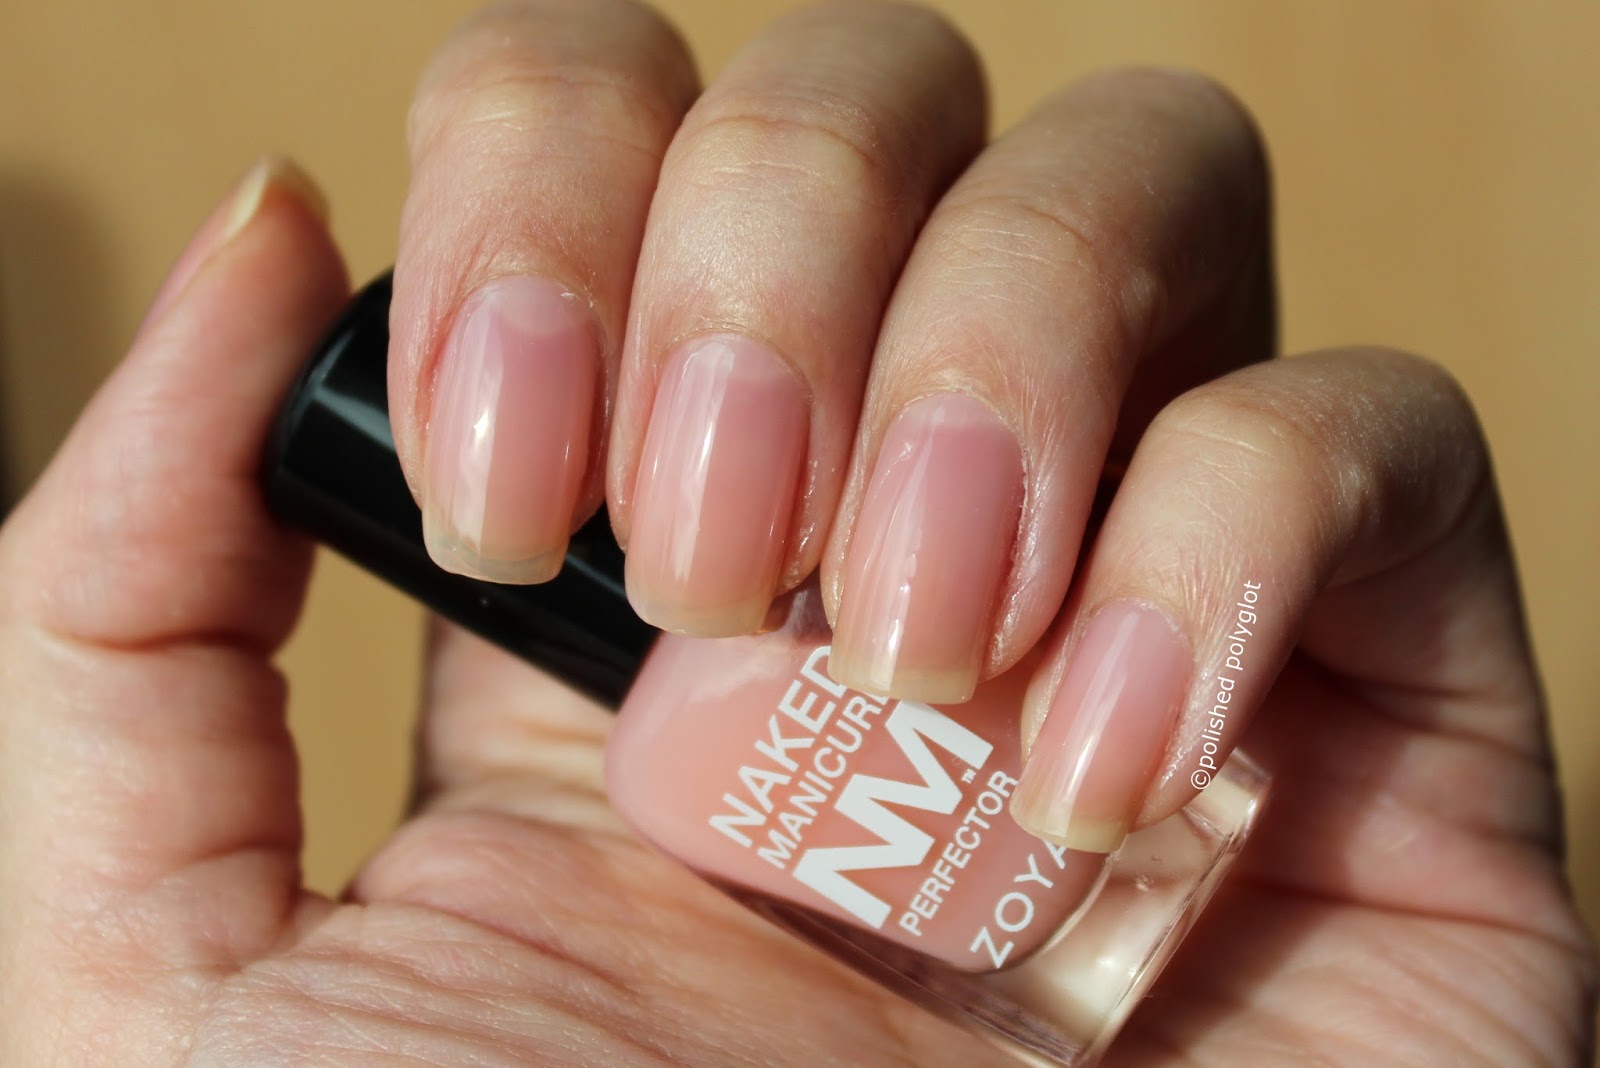 5. Zoya Naked Manicure Perfector, Argan Oil Infused Nail Color - wide 2